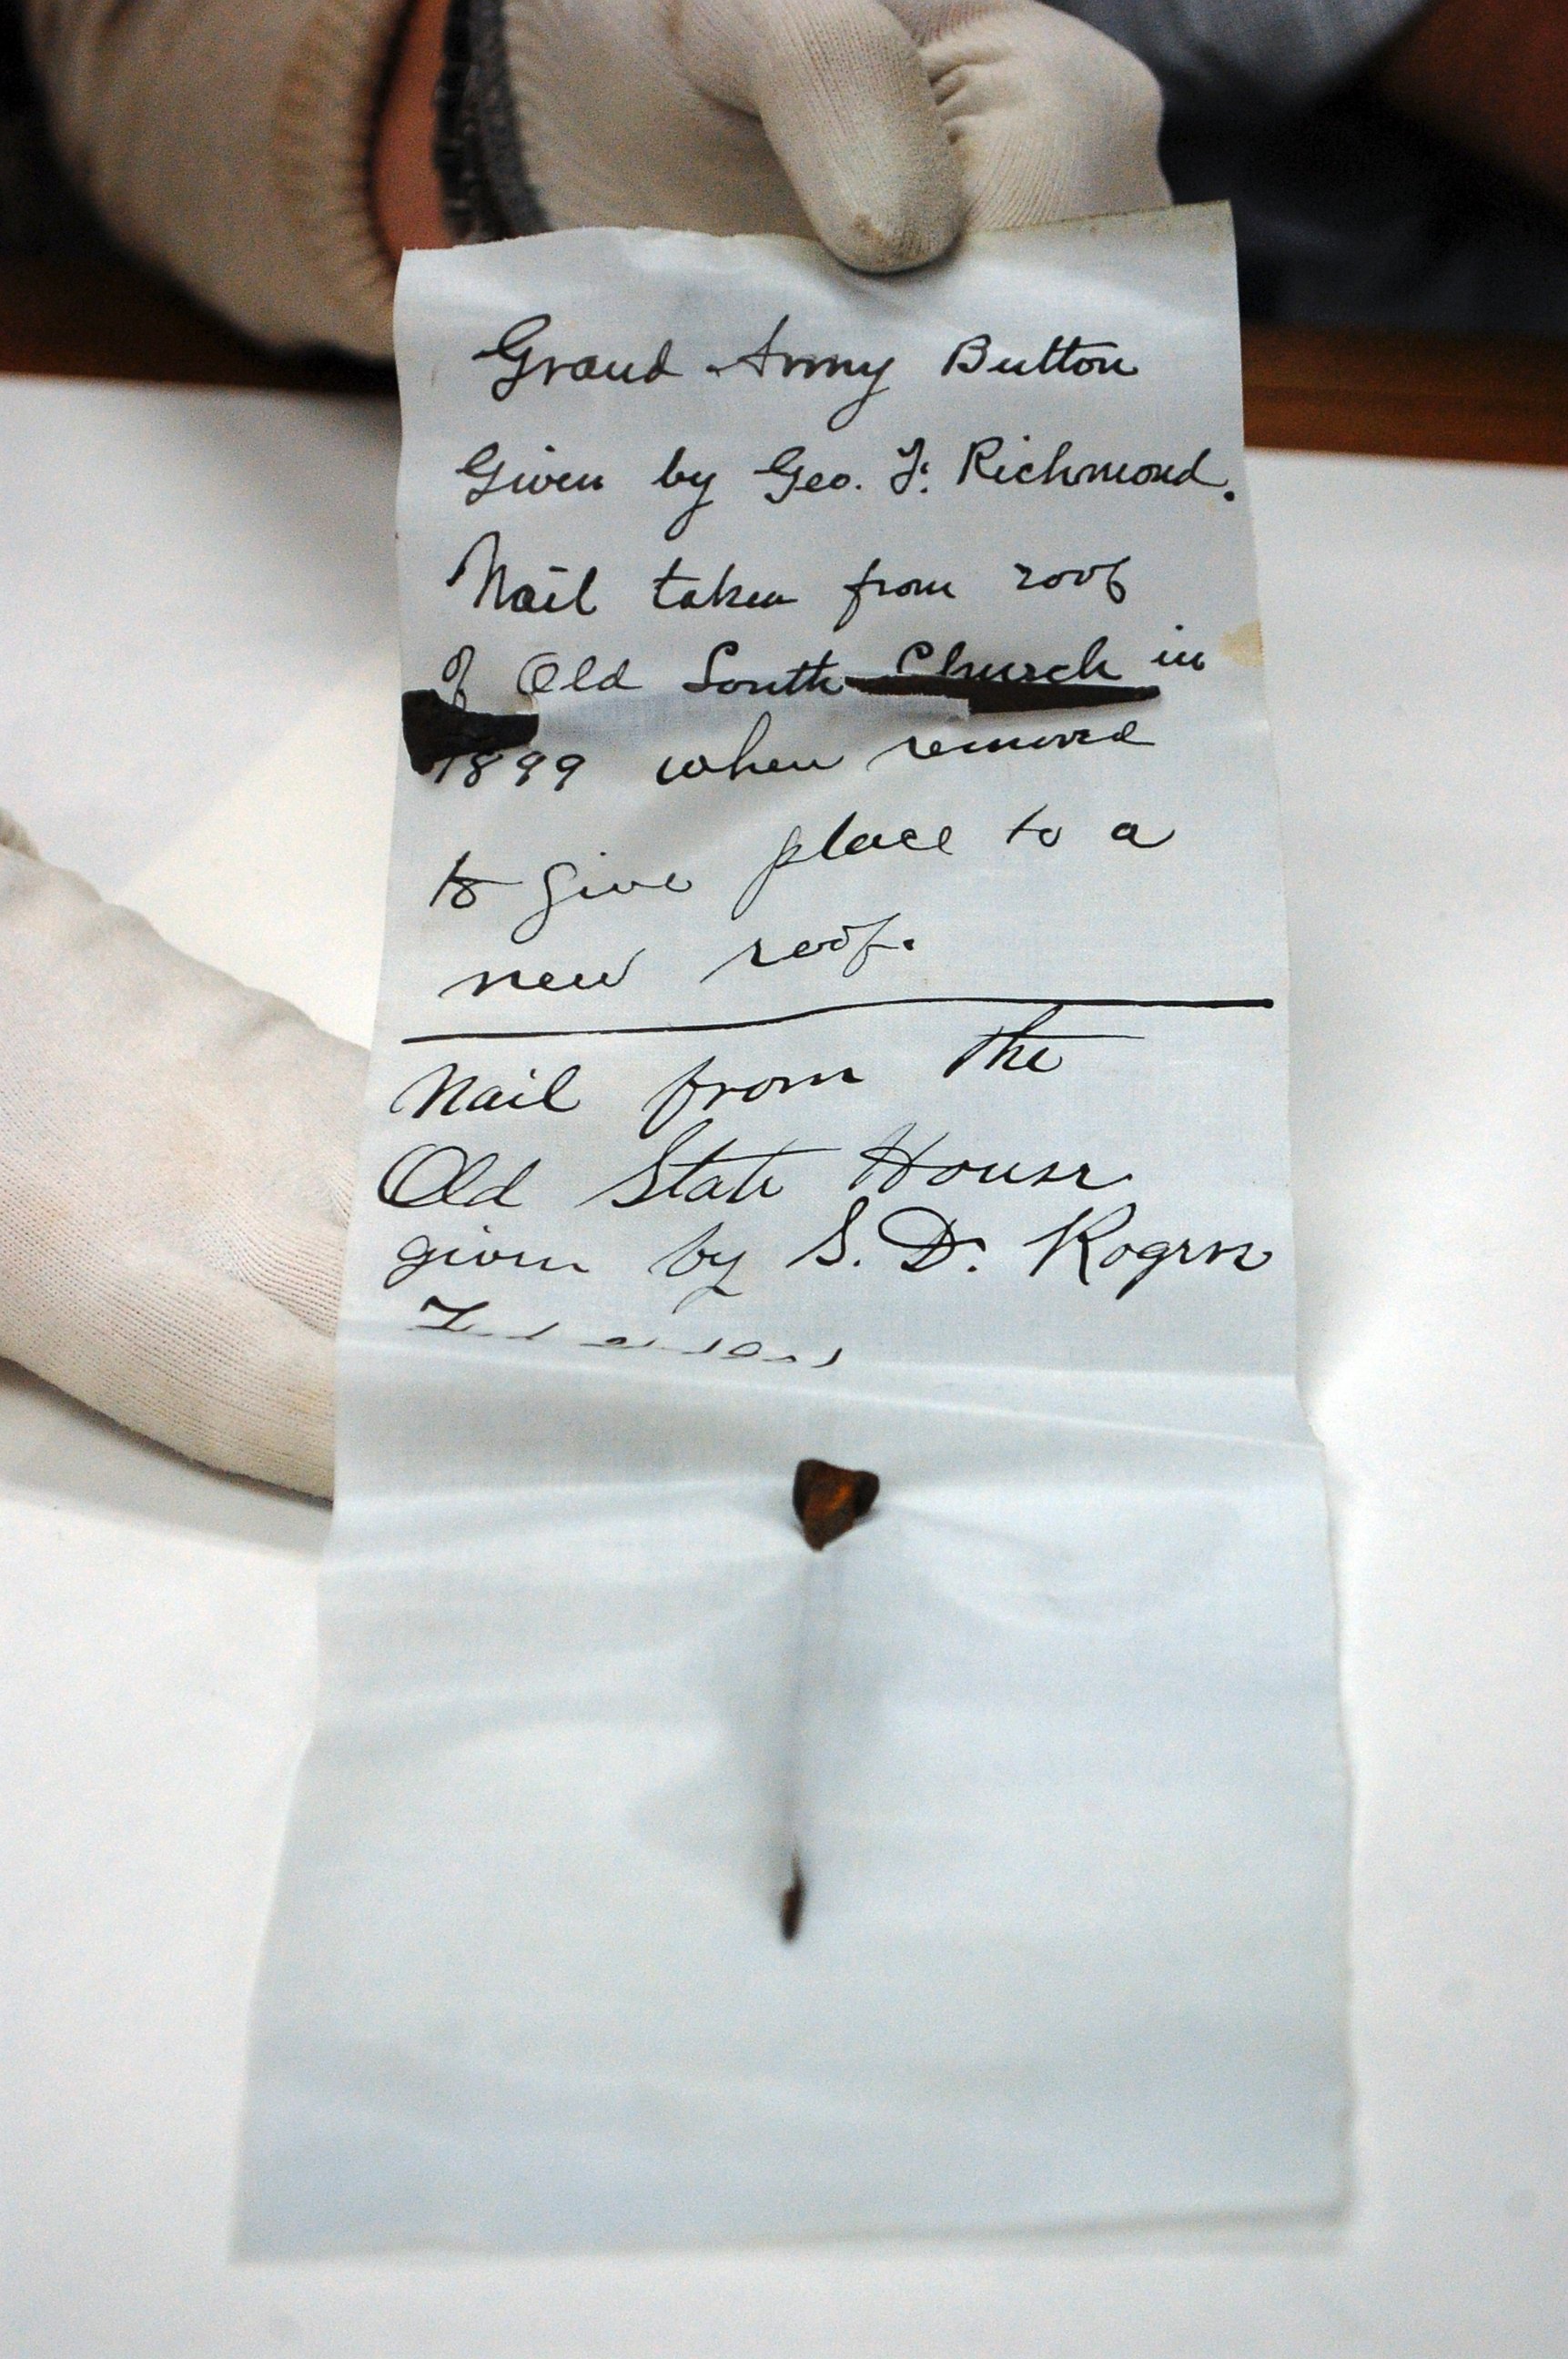 PHOTO: A nail from Old South Church is displayed after it was taken from a 1901 time capsule in Boston.